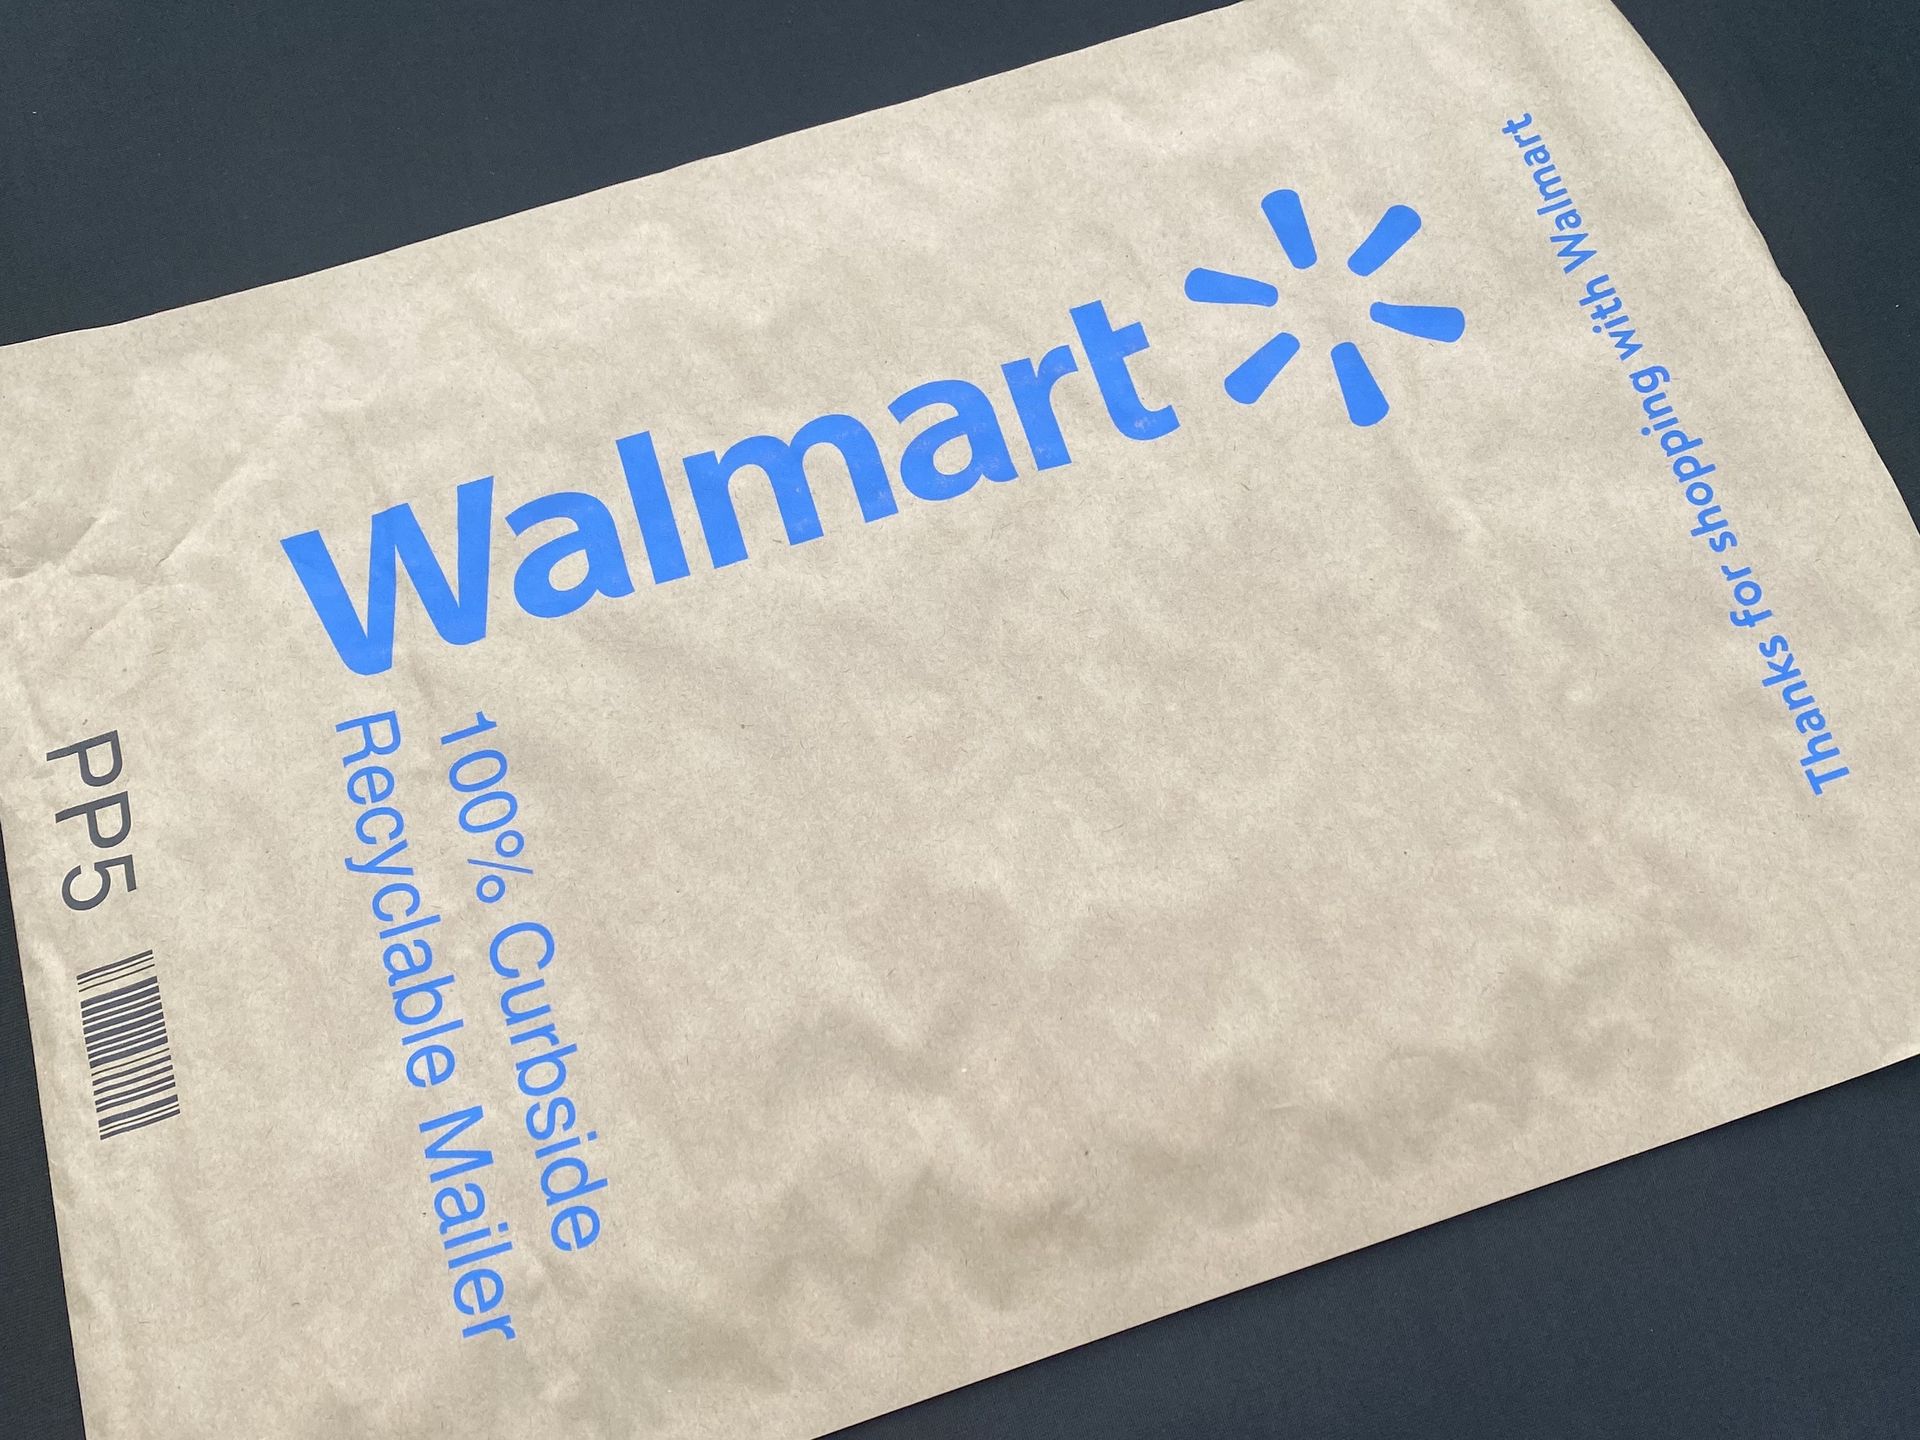 Walmart is America's largest grocer — and a big source of plastic waste